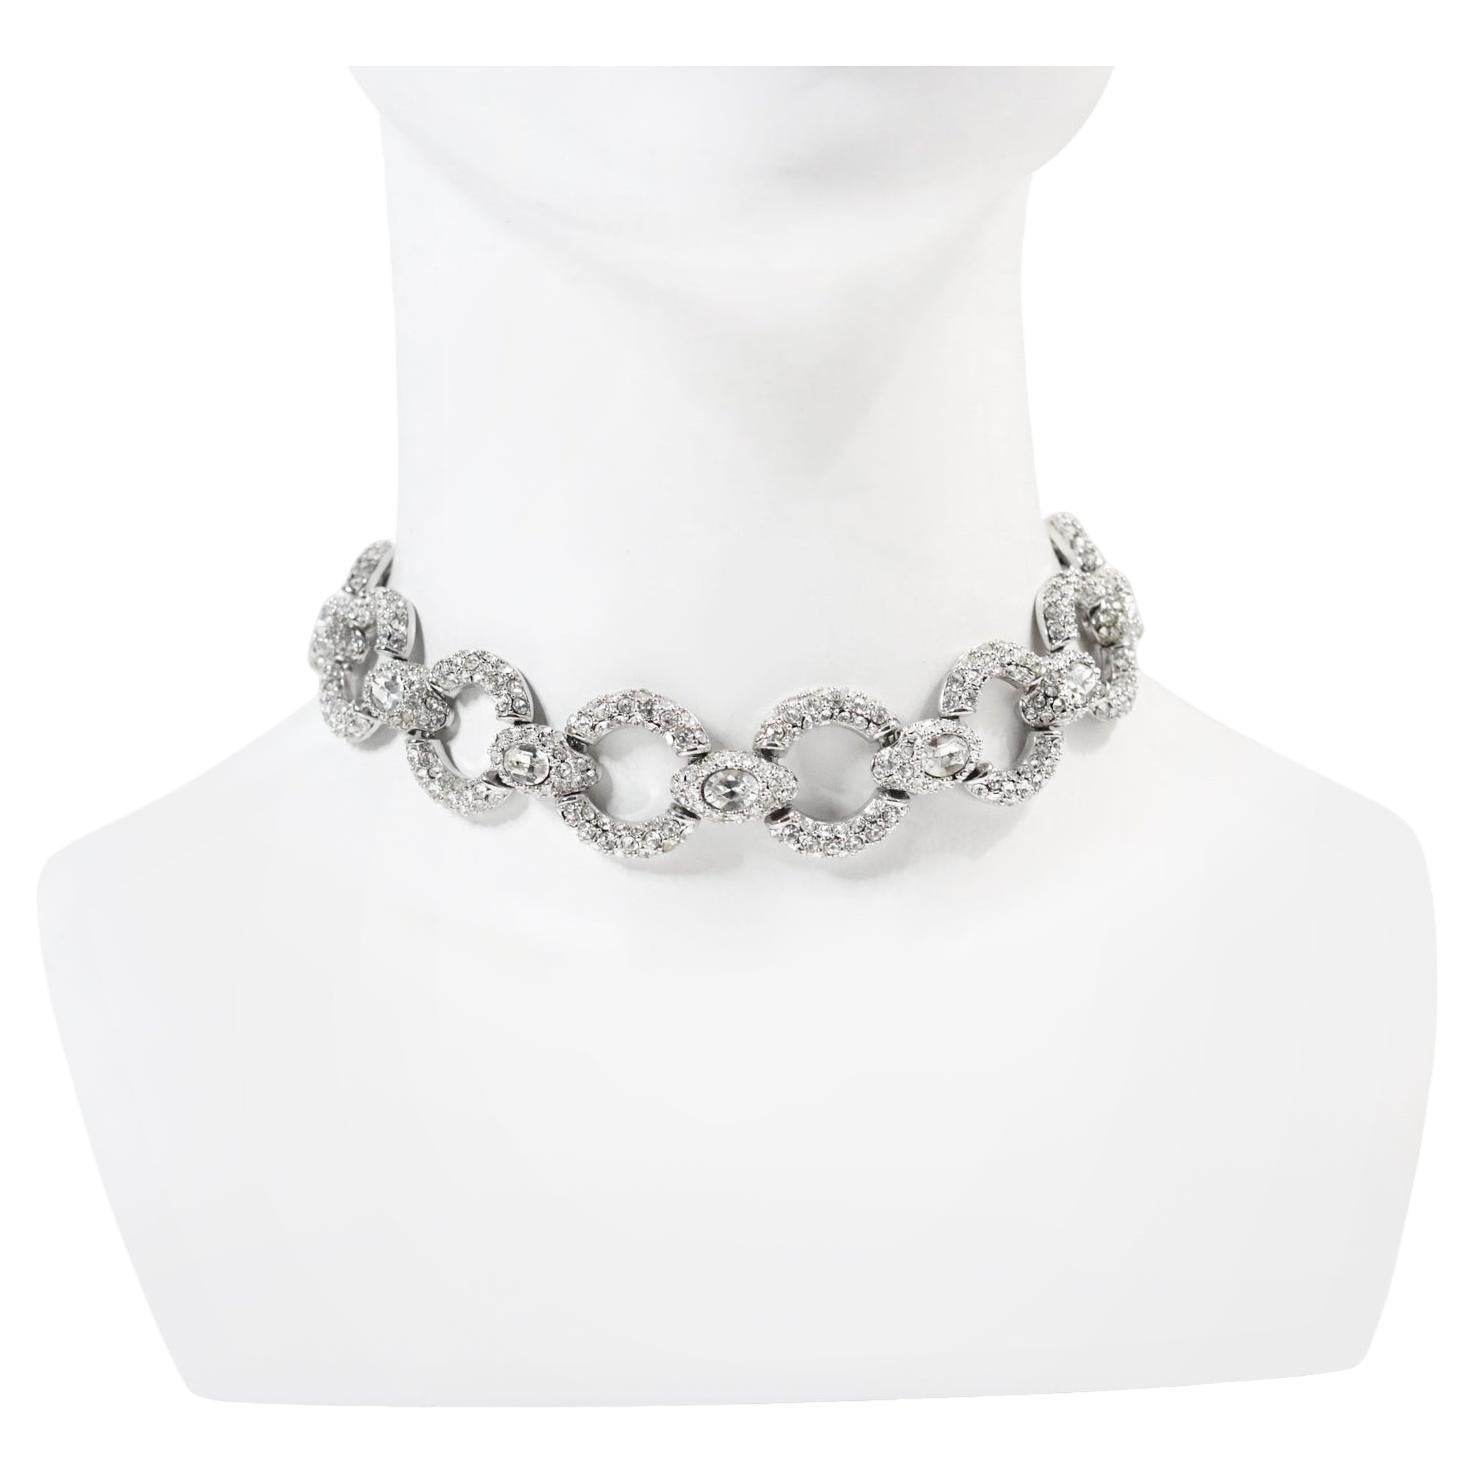 Vintage Diamante Pave Wide Choker Circa 1980s. This is just a cool piece but has no curb appeal until you see it on. Then it comes alive. Oval circles of wide pave and then a large crystal in the middle separates each piece.

Substantial and well